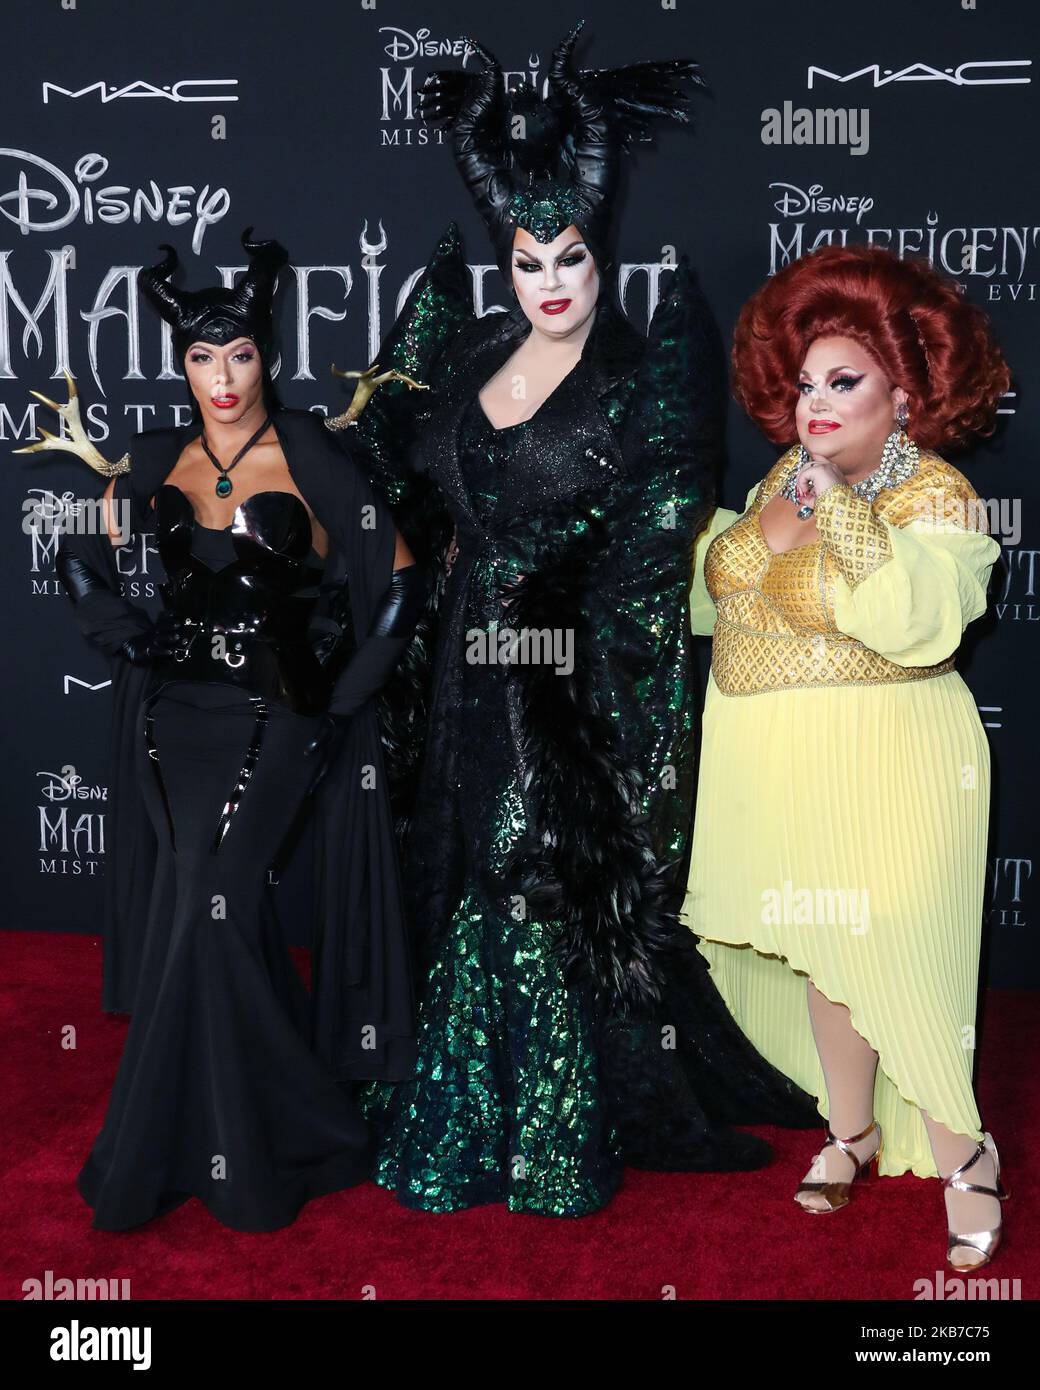 HOLLYWOOD, LOS ANGELES, CALIFORNIA, USA - SEPTEMBER 30: Shangela and Nina West, Ginger Minj arrive at the World Premiere Of Disney's 'Maleficent: Mistress Of Evil' held at the El Capitan Theatre on September 30, 2019 in Hollywood, Los Angeles, California, United States. (Photo by Xavier Collin/Image Press Agency/NurPhoto) Stock Photo